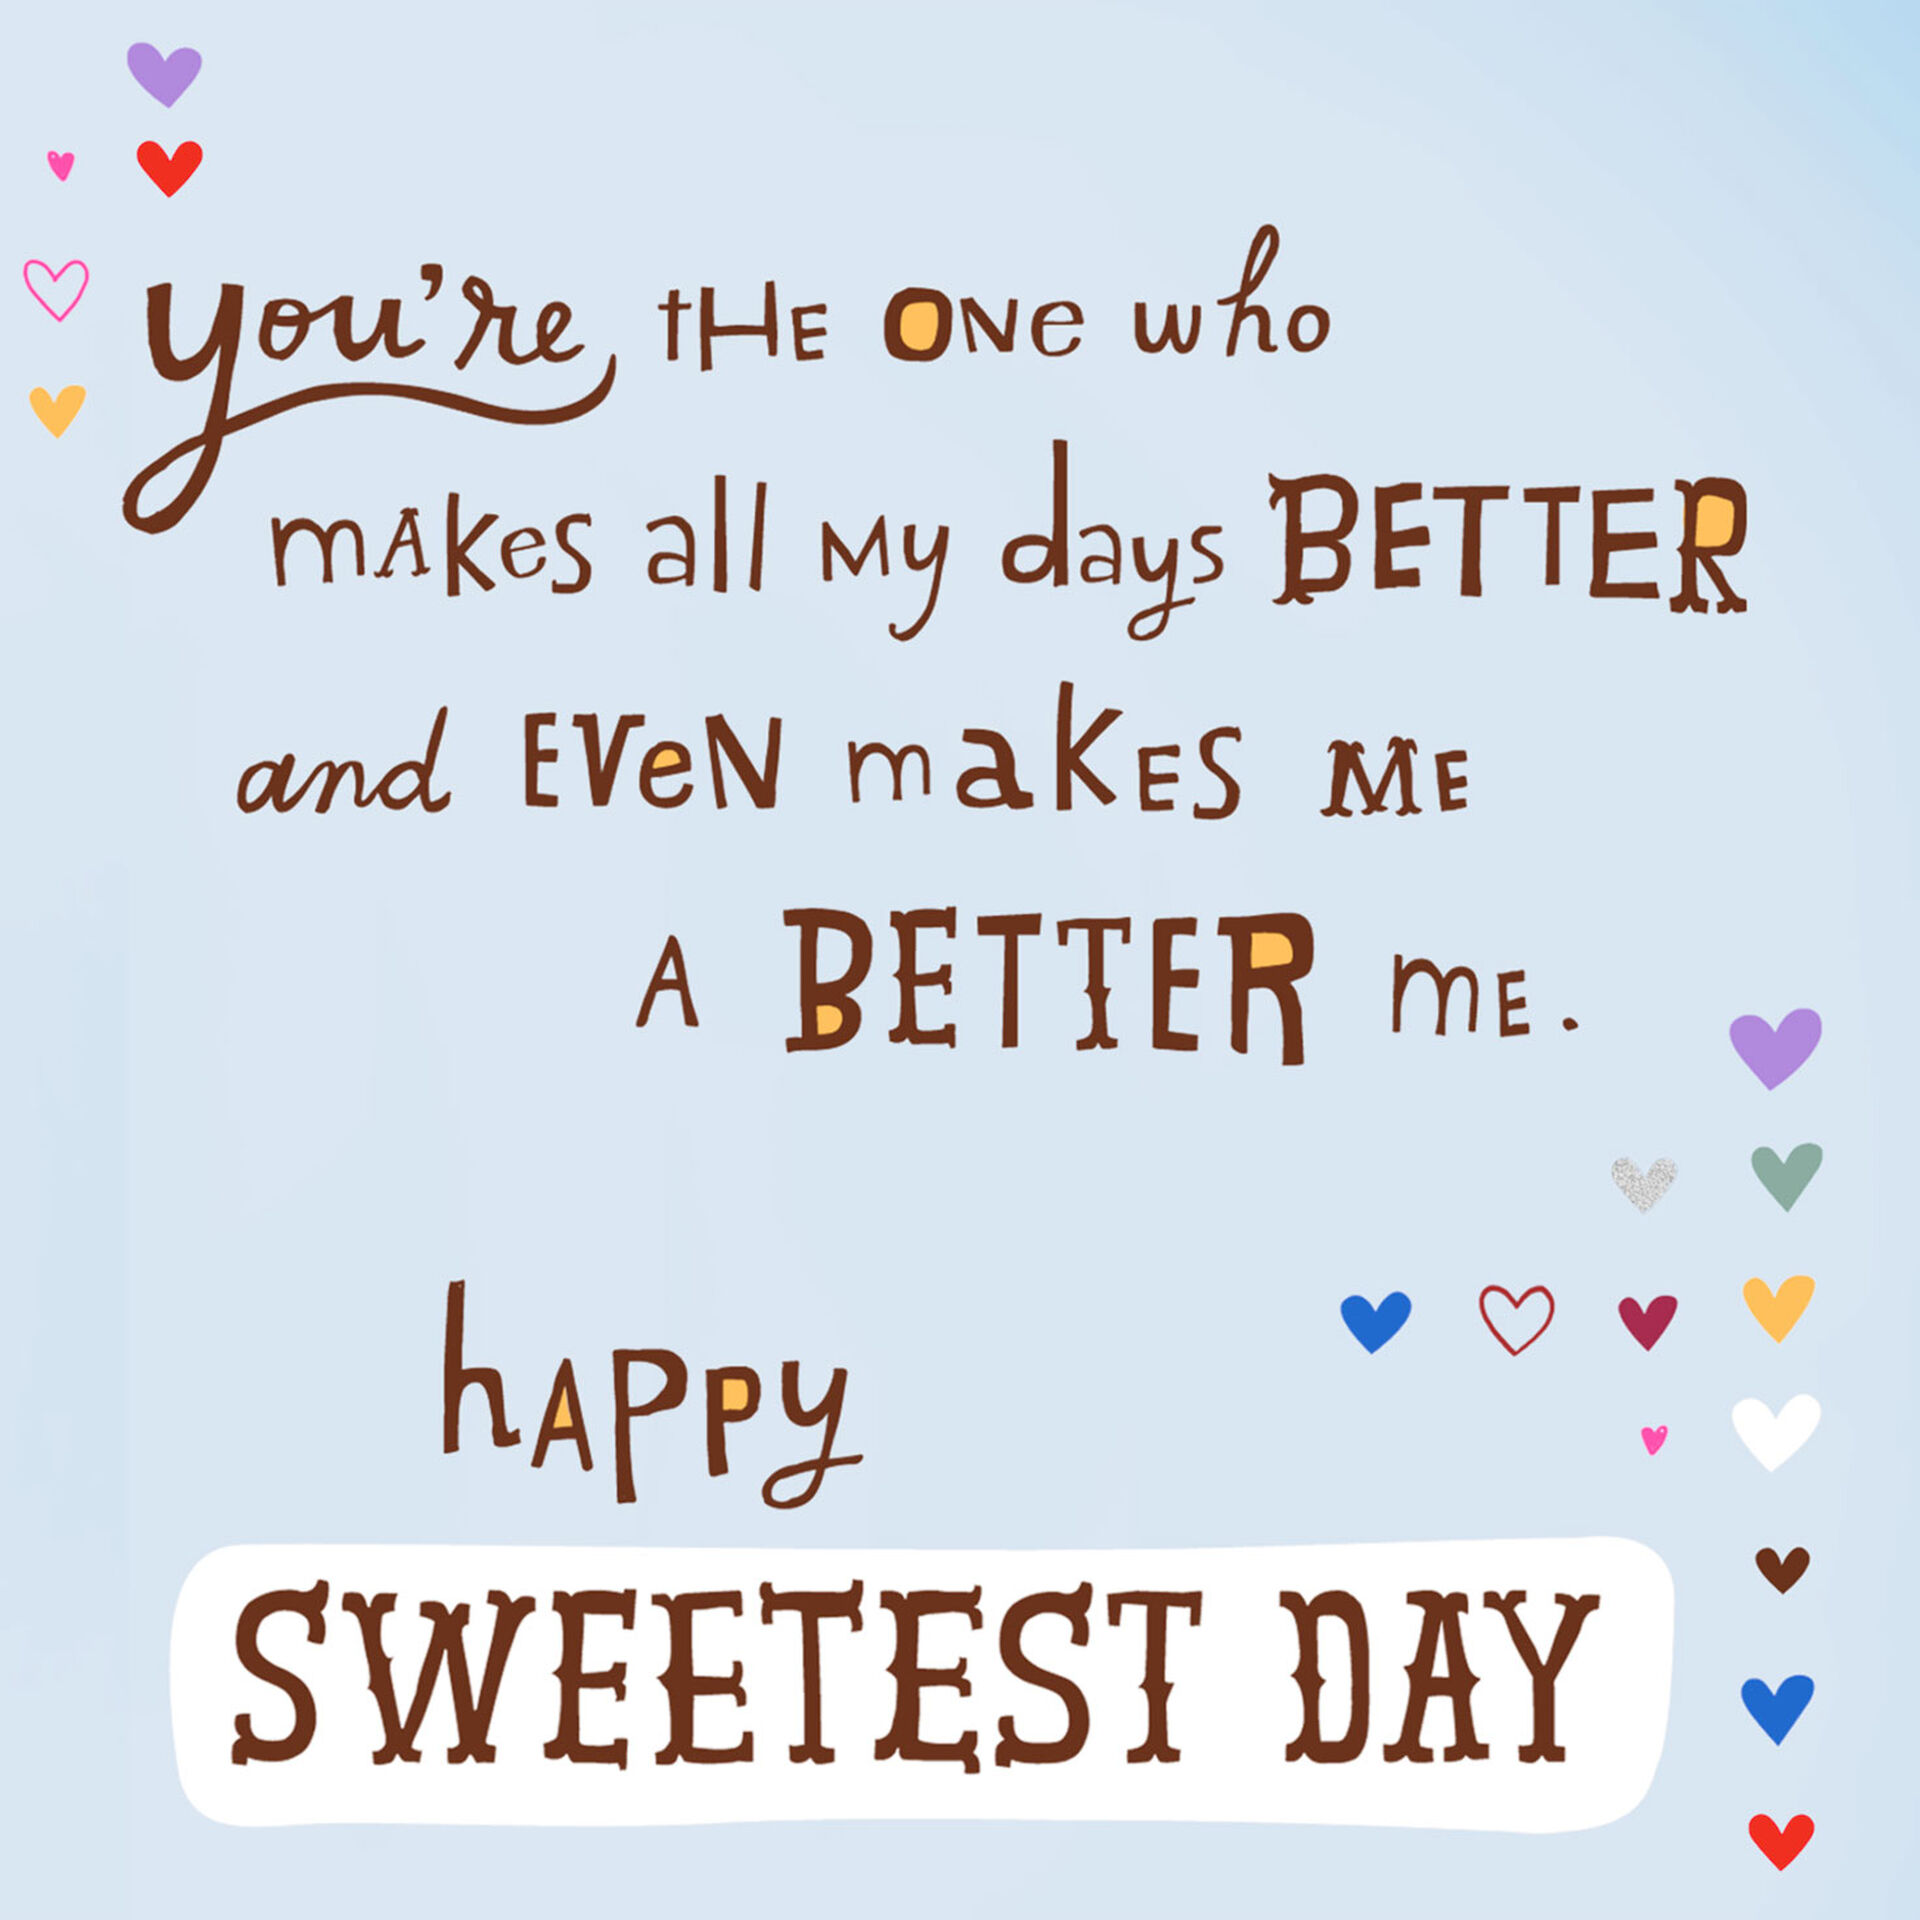 You Make Me a Better Me Sweetest Day Love Card - Greeting Cards - Hallmark